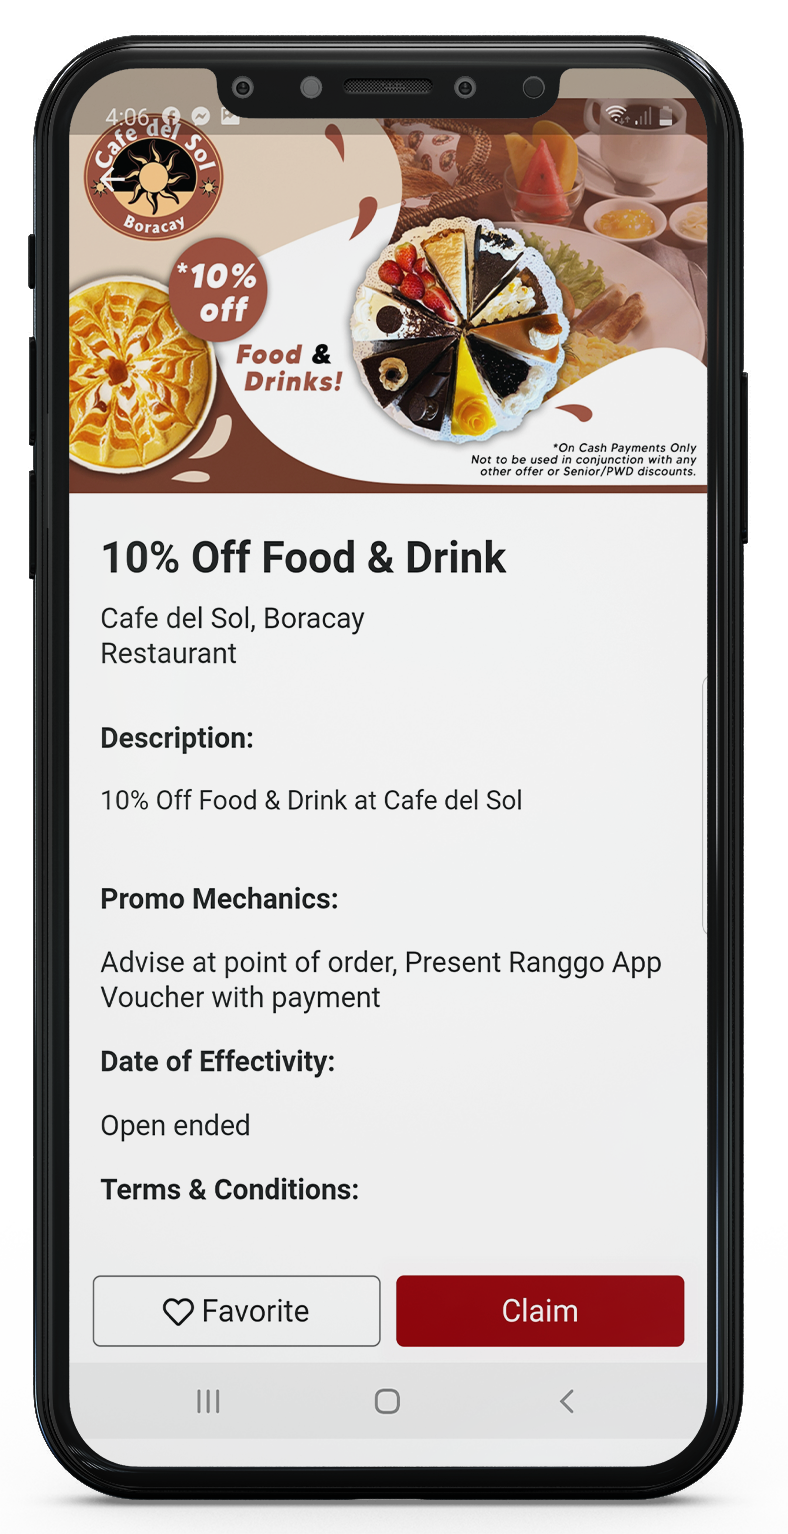 Example of a Loyalty Deal available on the RANGGO App